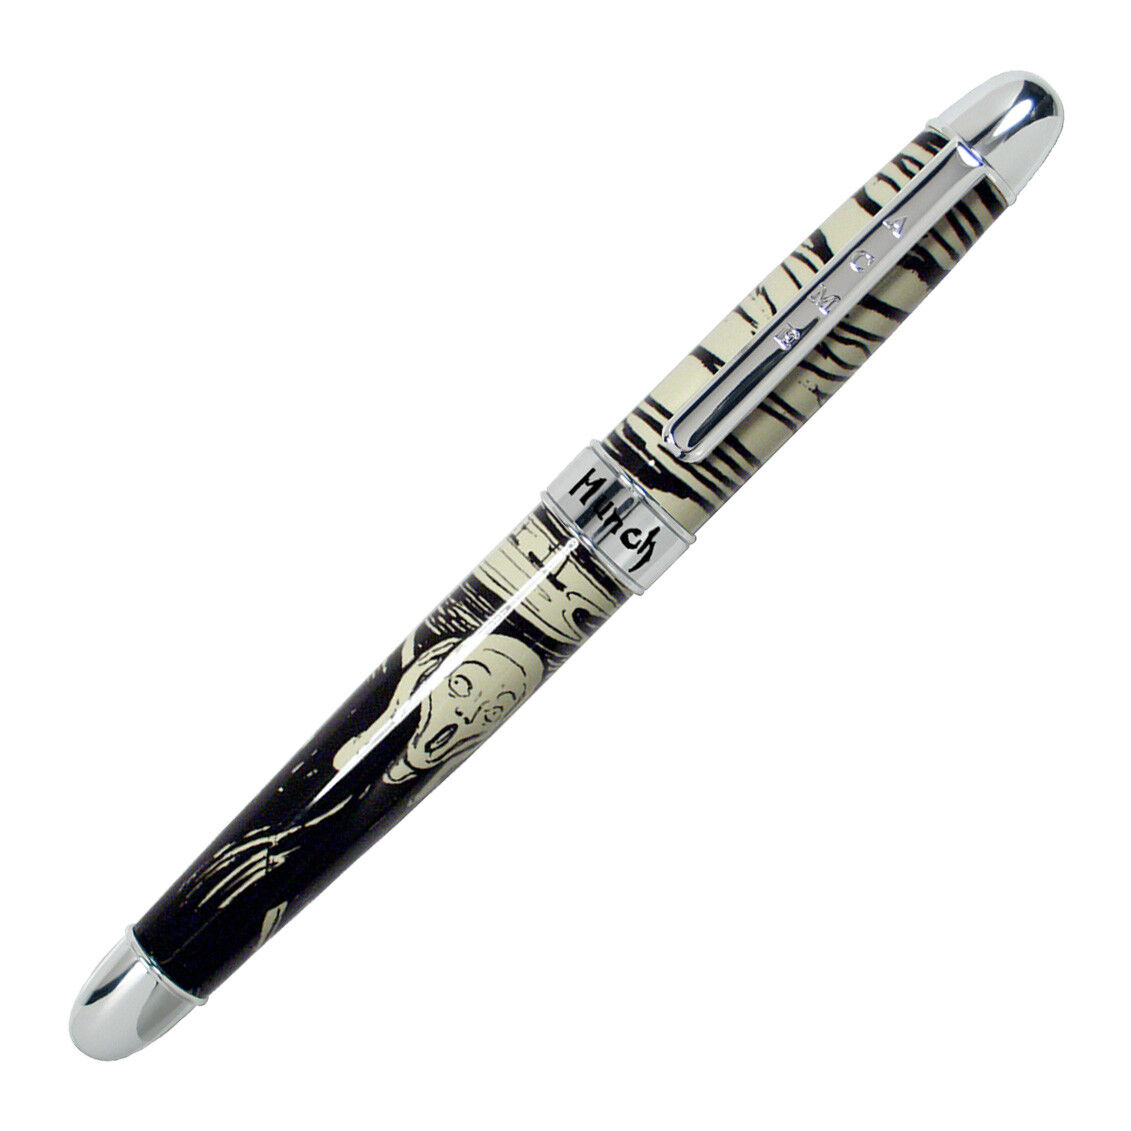 Archived ACME Studio EDVARD MUNCH “The Cry / The Scream” Roller Ball Pen